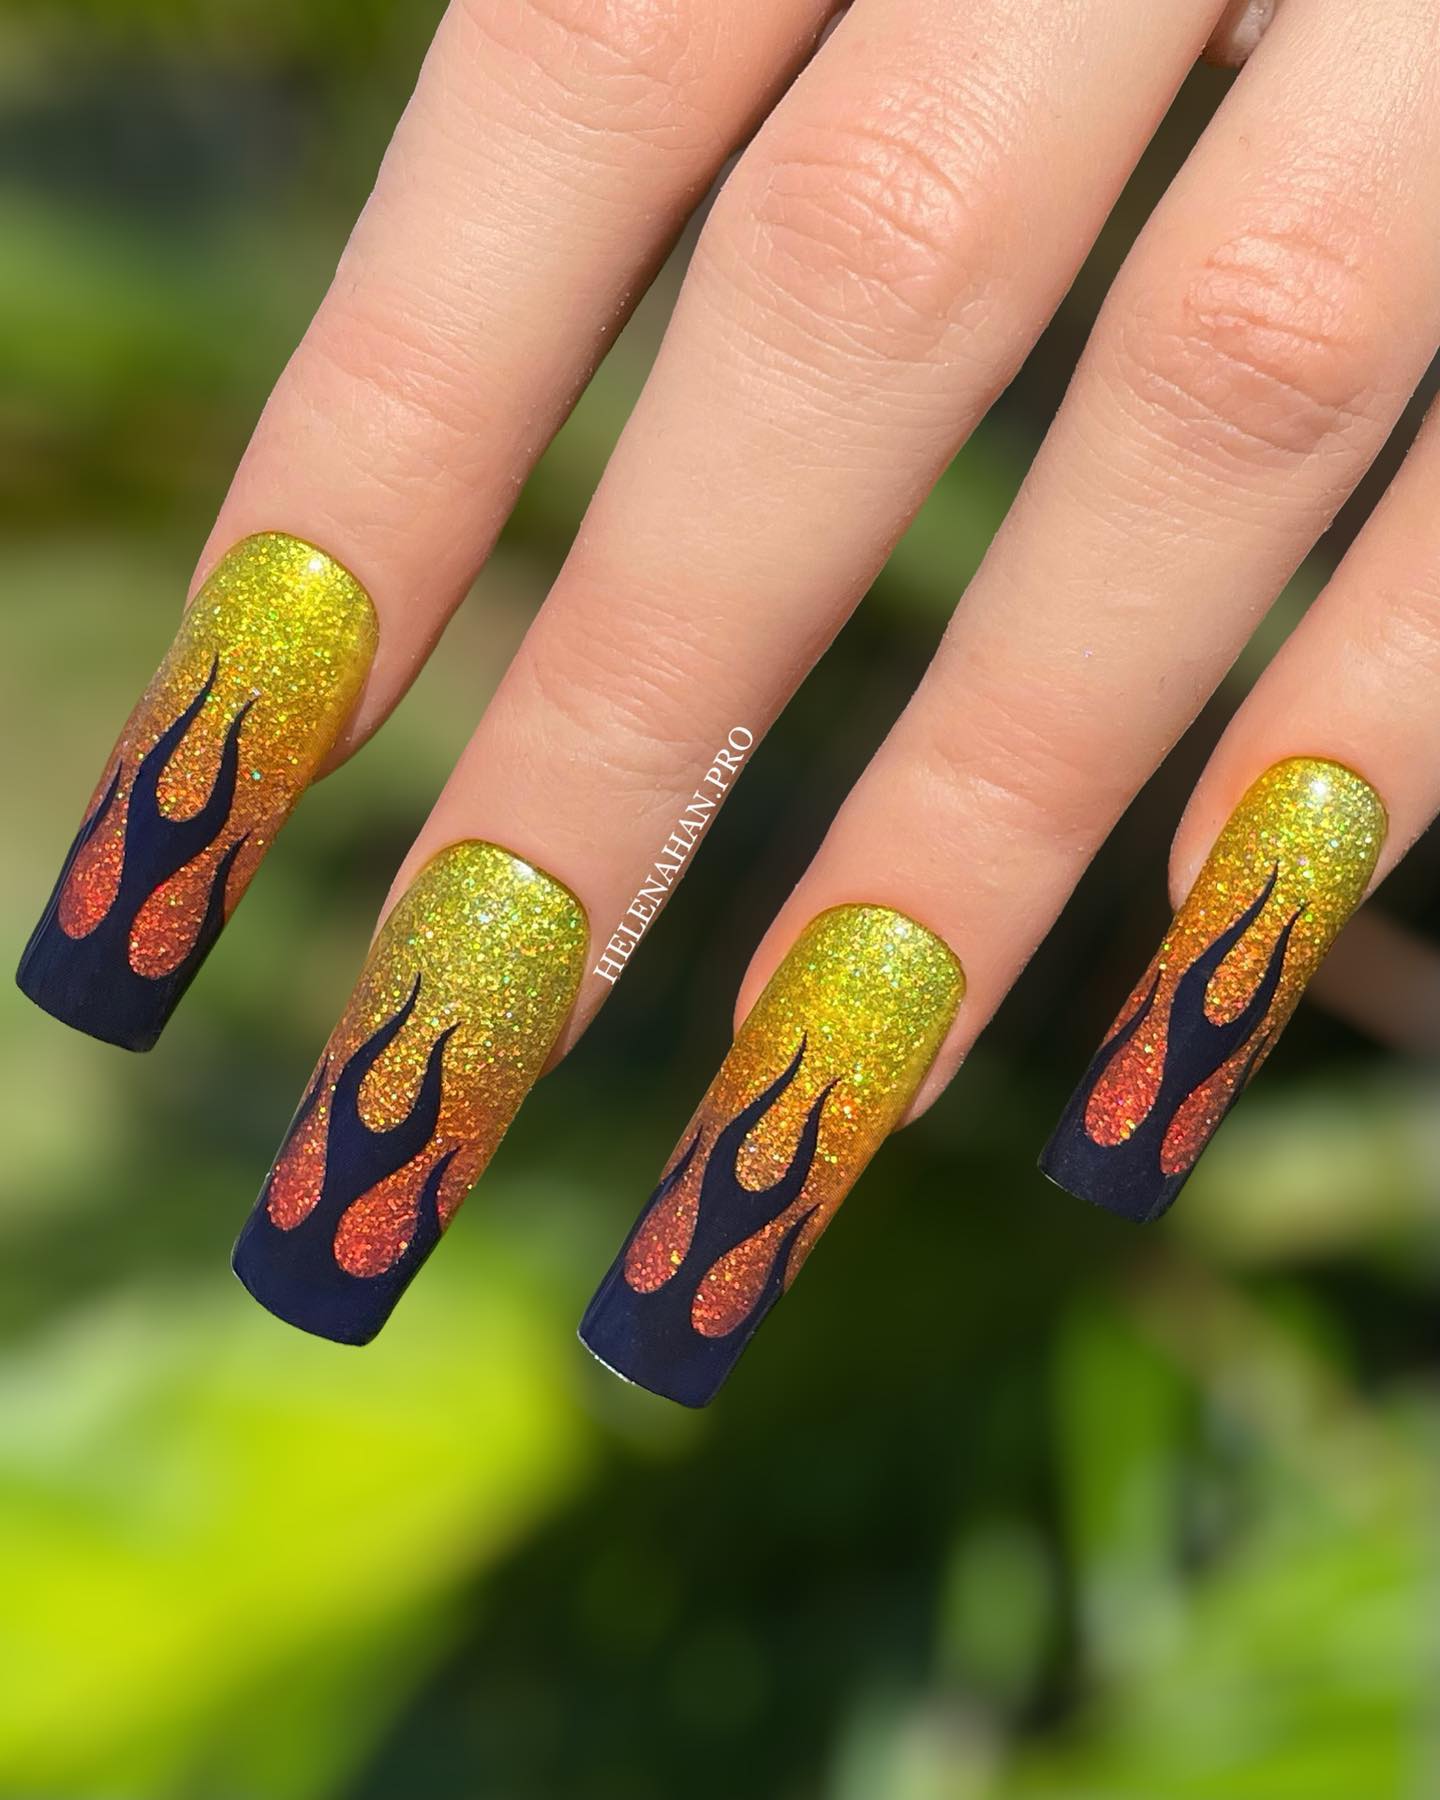 Holographic nails scatters the light in a way that it creates a special light effect. Are you ready to shine out with your long and shiny flame nail art? The color combo of yellow and orange is matching with black flames.